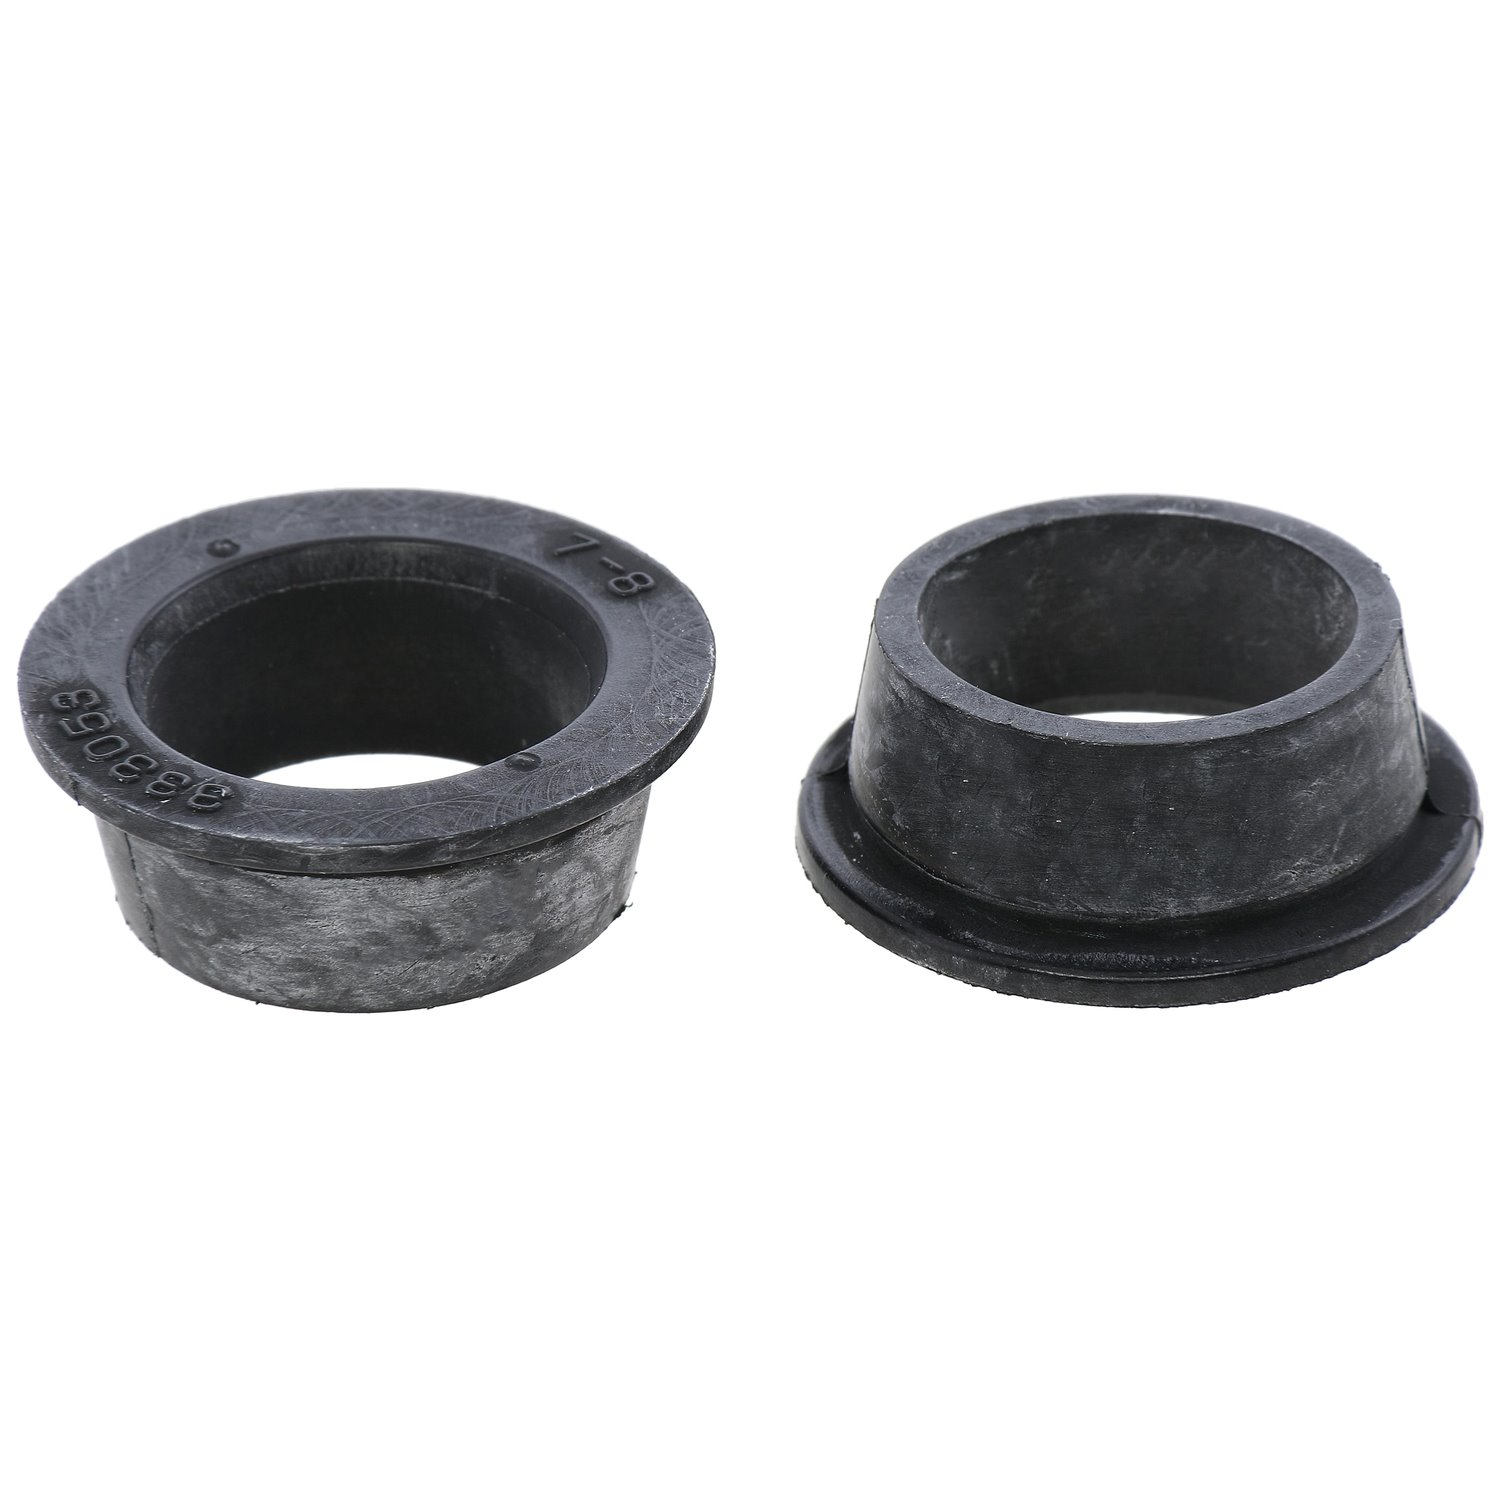 JBU2720 Rack and Pinion Mount Bushing Fits Select Honda Models, Position: Left/Driver or Right/Passenger, Right